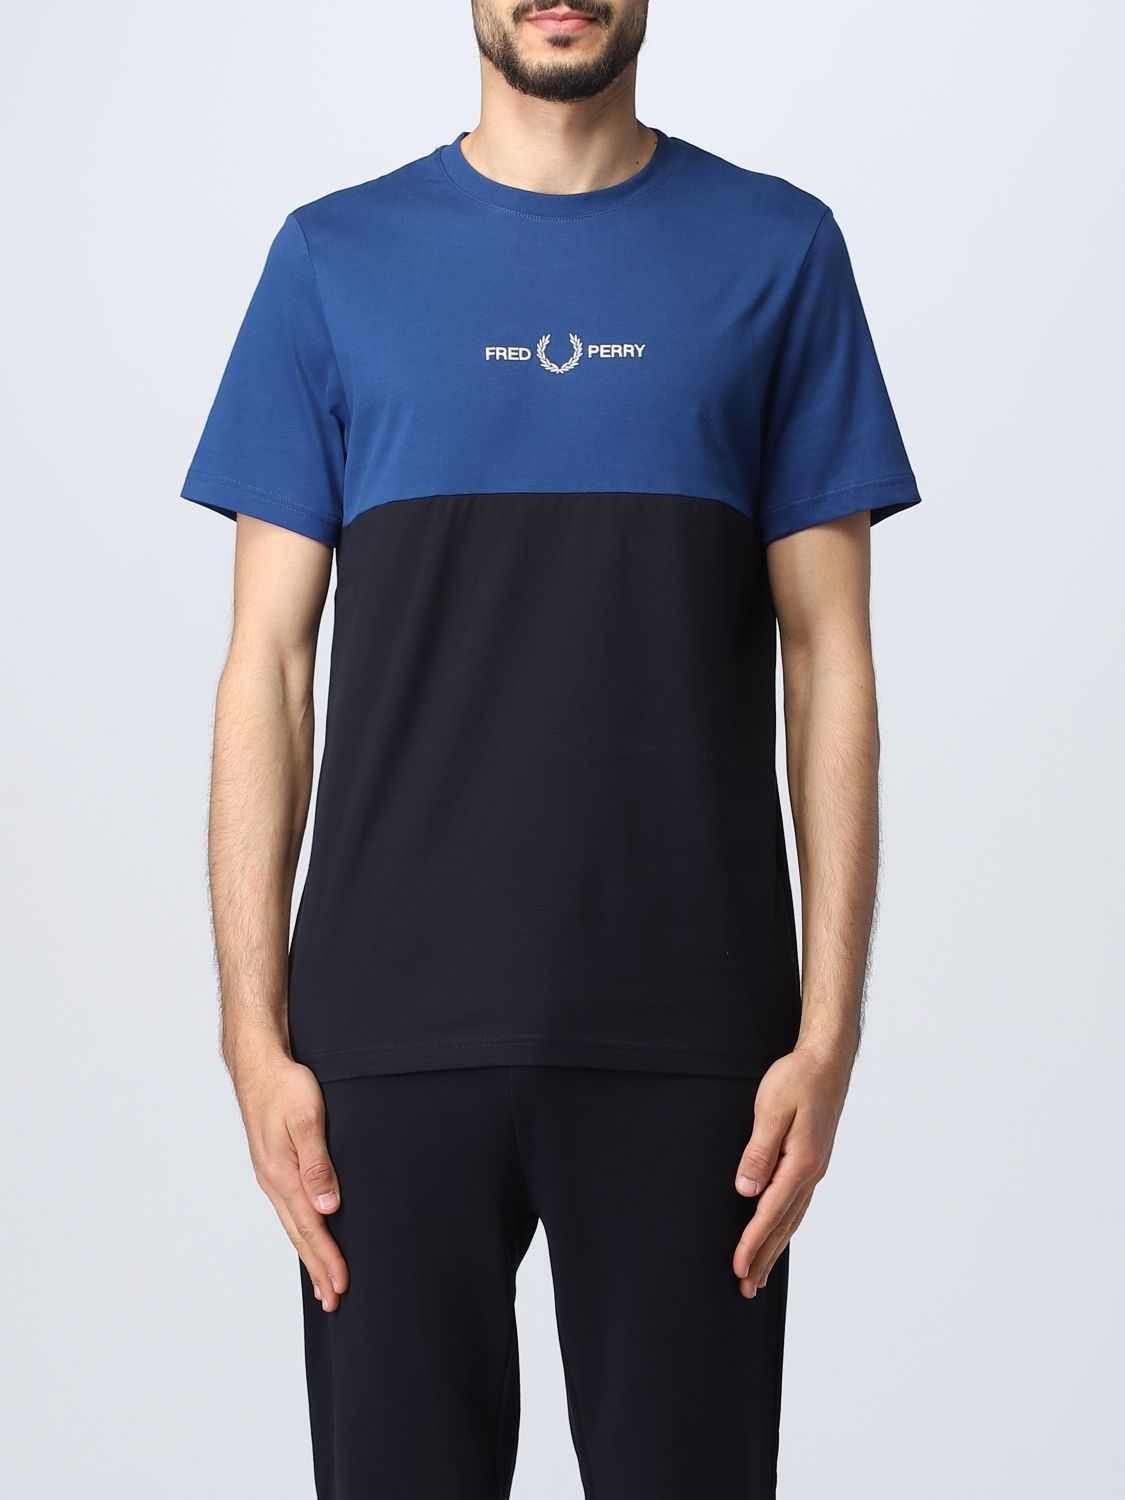 FRED PERRY: t-shirt for man - Navy | Fred Perry t-shirt M5617 online on ...